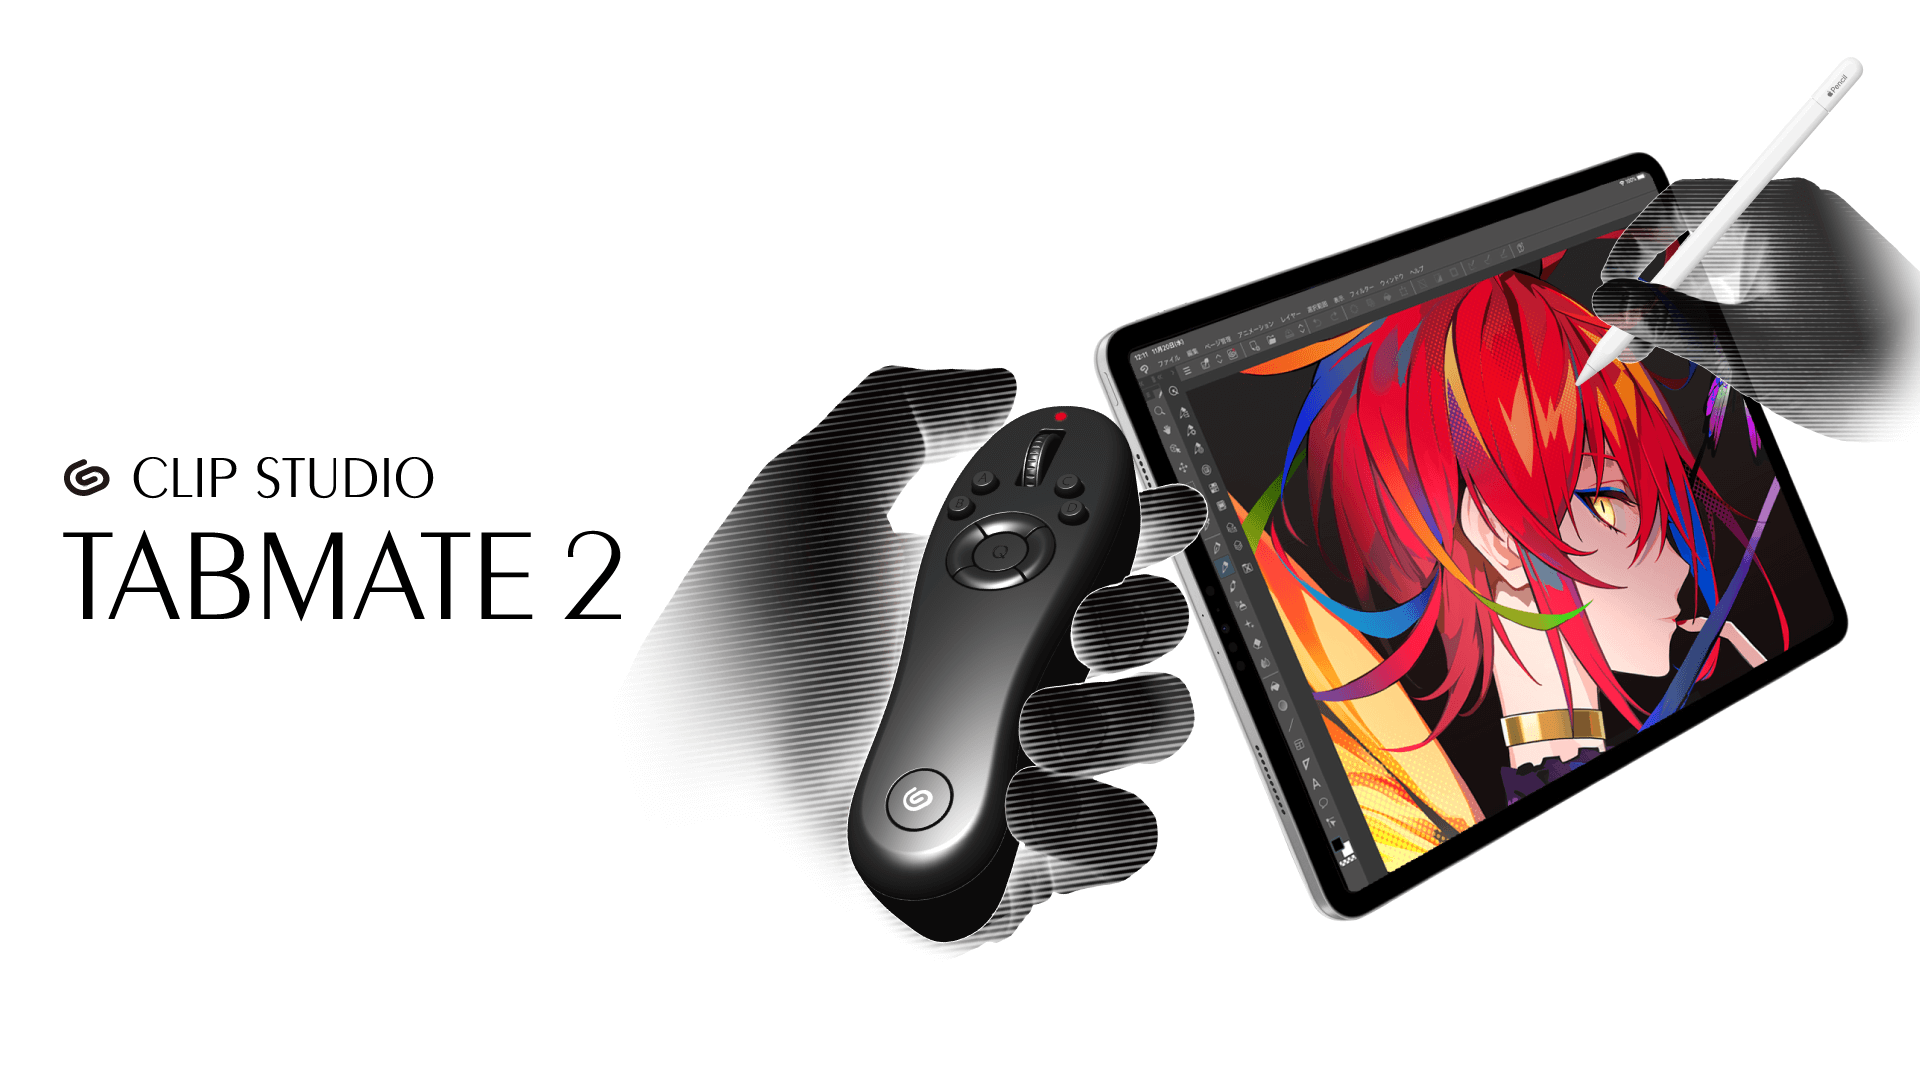 Clip Studio Tabmate 2　Announcement of the start of shipments in Japan and the pre-order period sales results